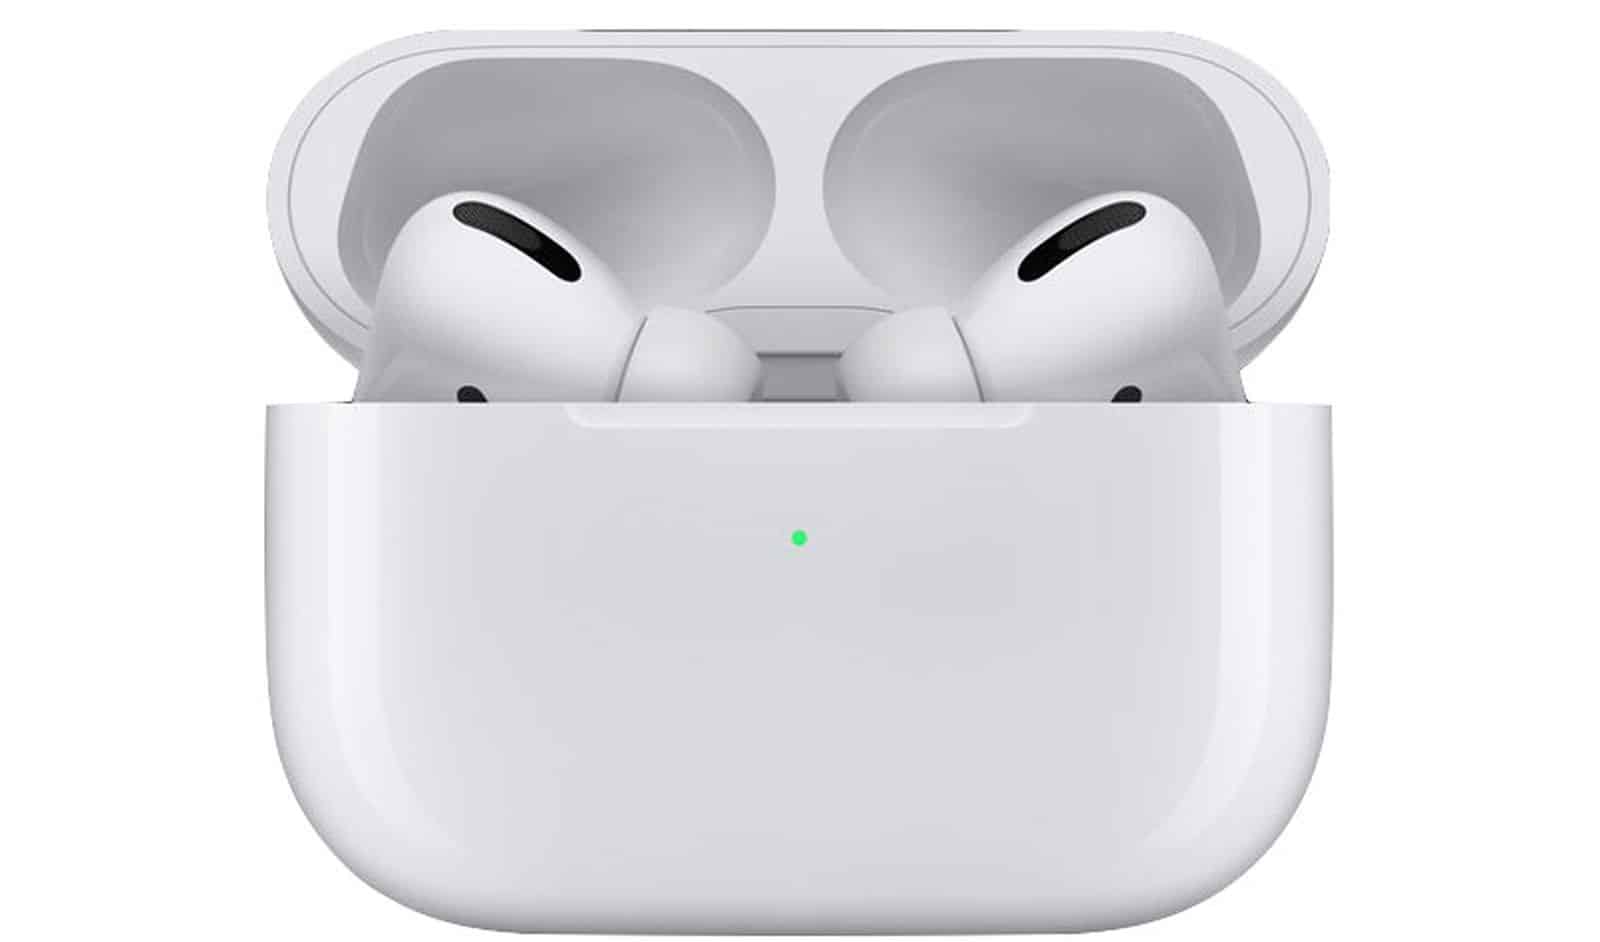 Apple’s AirPods Pro takes music to a whole new level